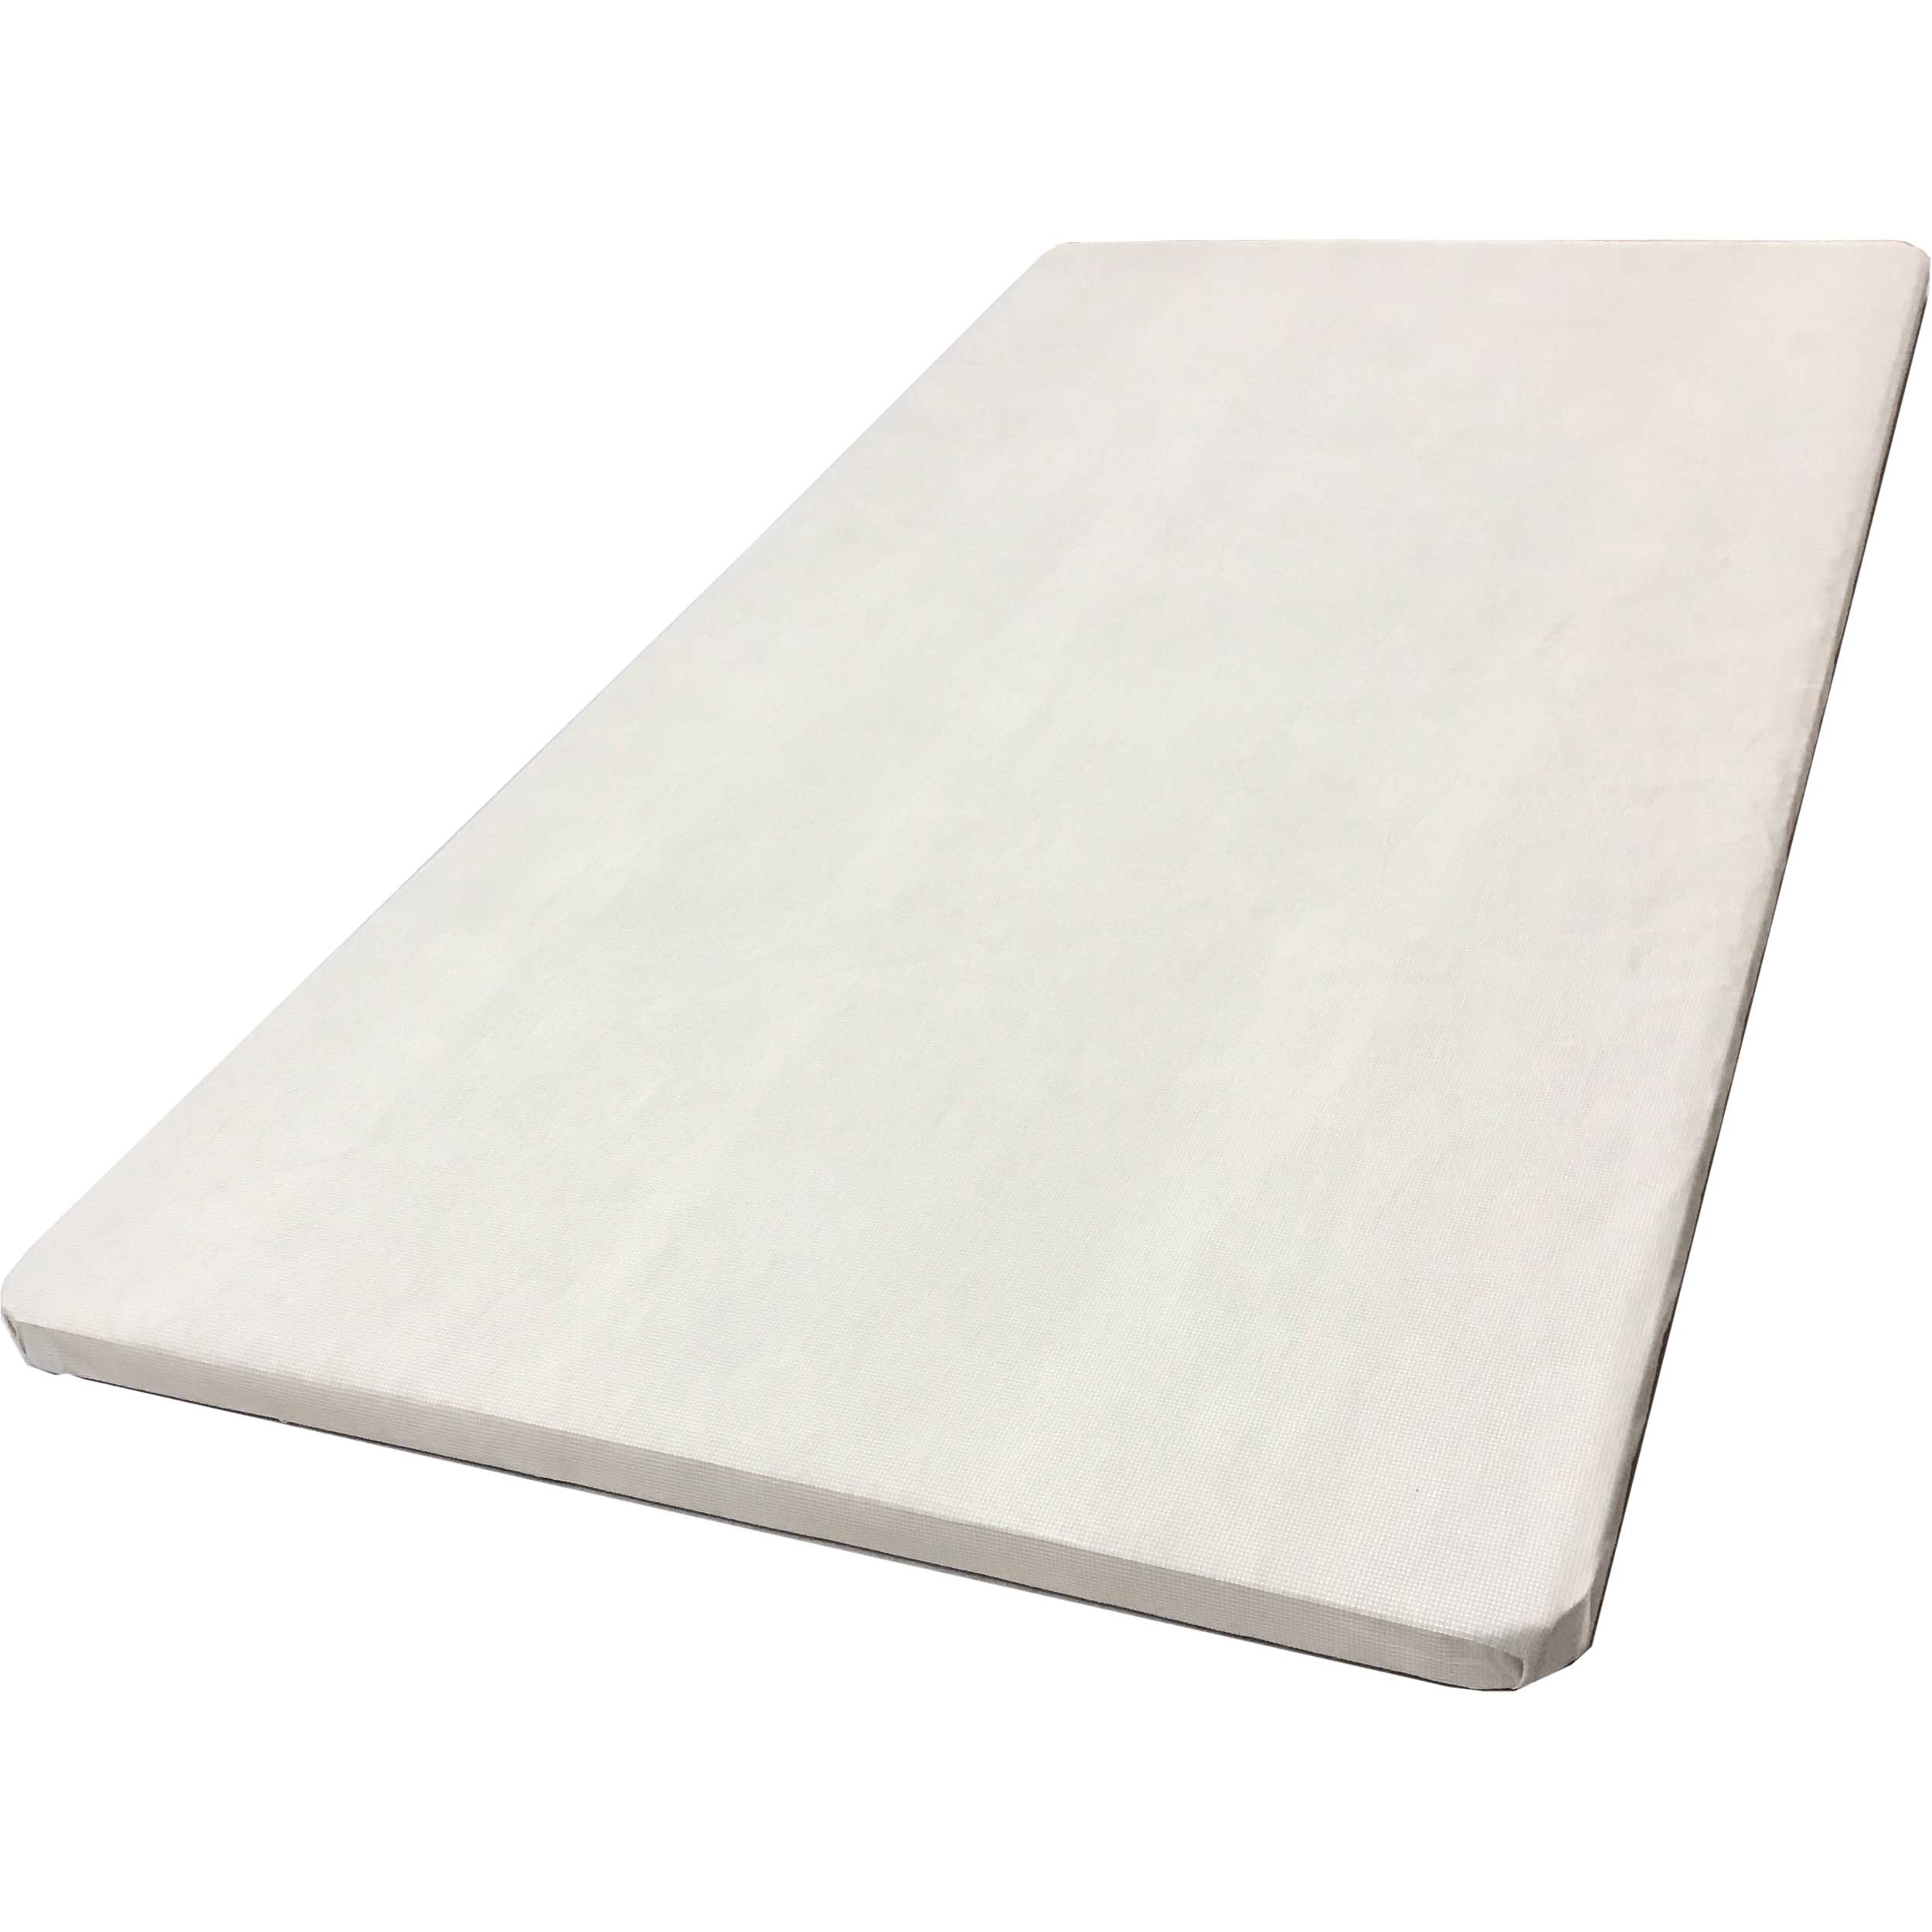 Bunky Board foundation for mattress